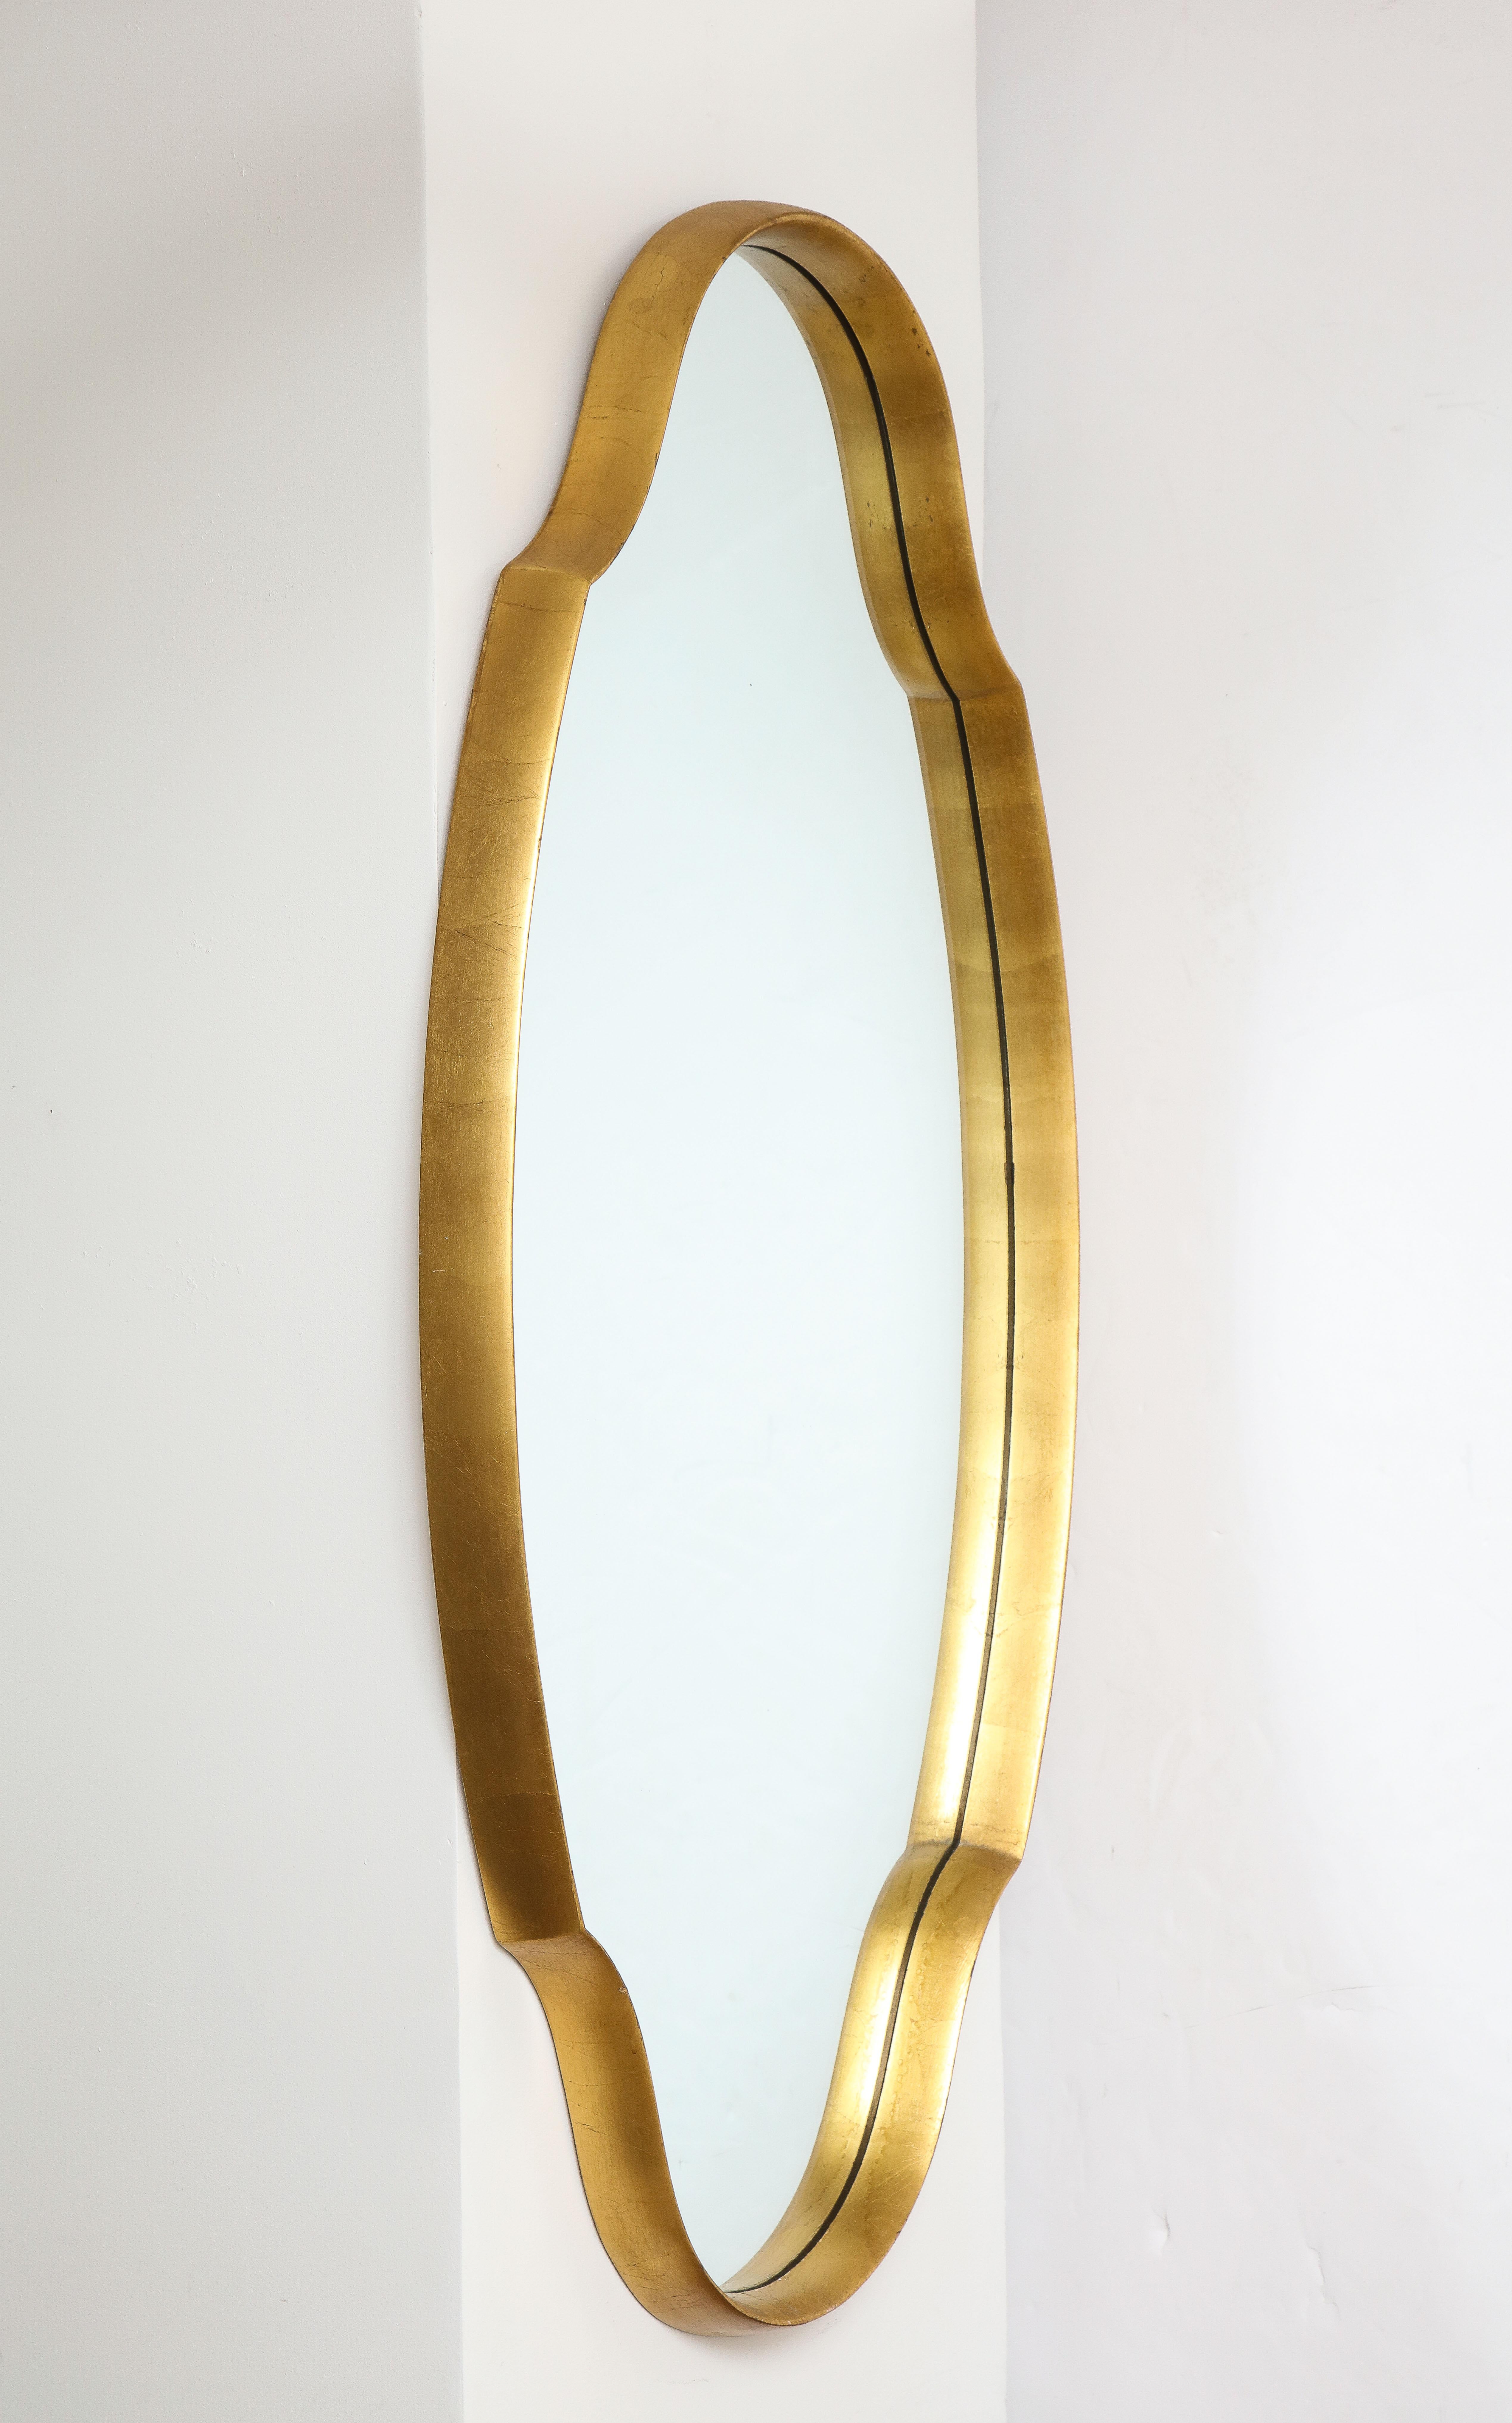 Stunning 1960's Mid-Century Modern gold leaf wall mirror in the style of La Barge, in vintage original condition with minor wear and patina due to age and use.